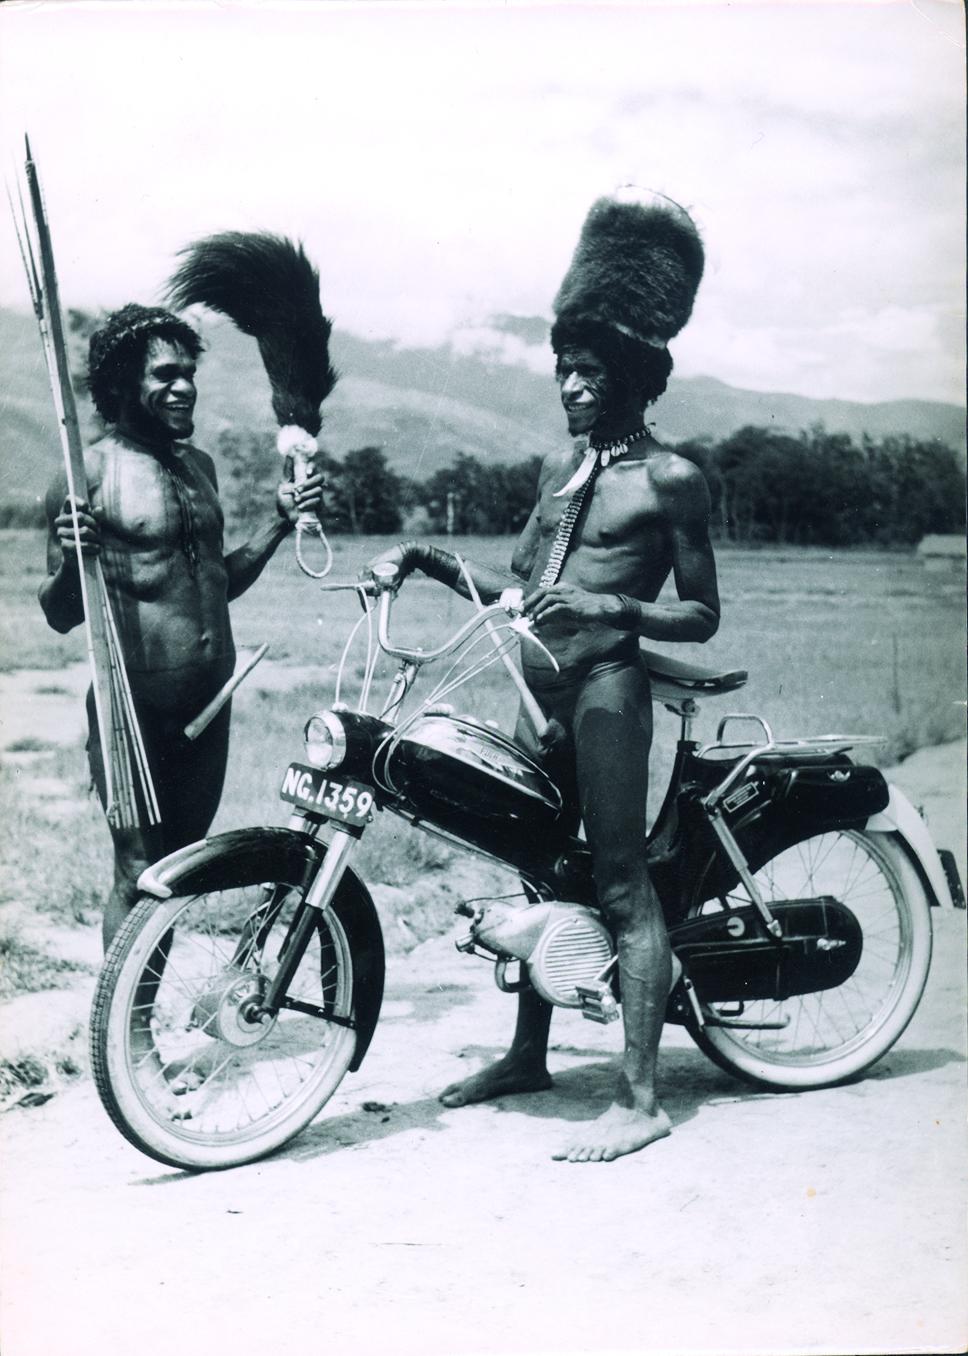 Photograph by Nico Verheyen, one of the early Catholic missionaries in the Baliem Valley, of his...